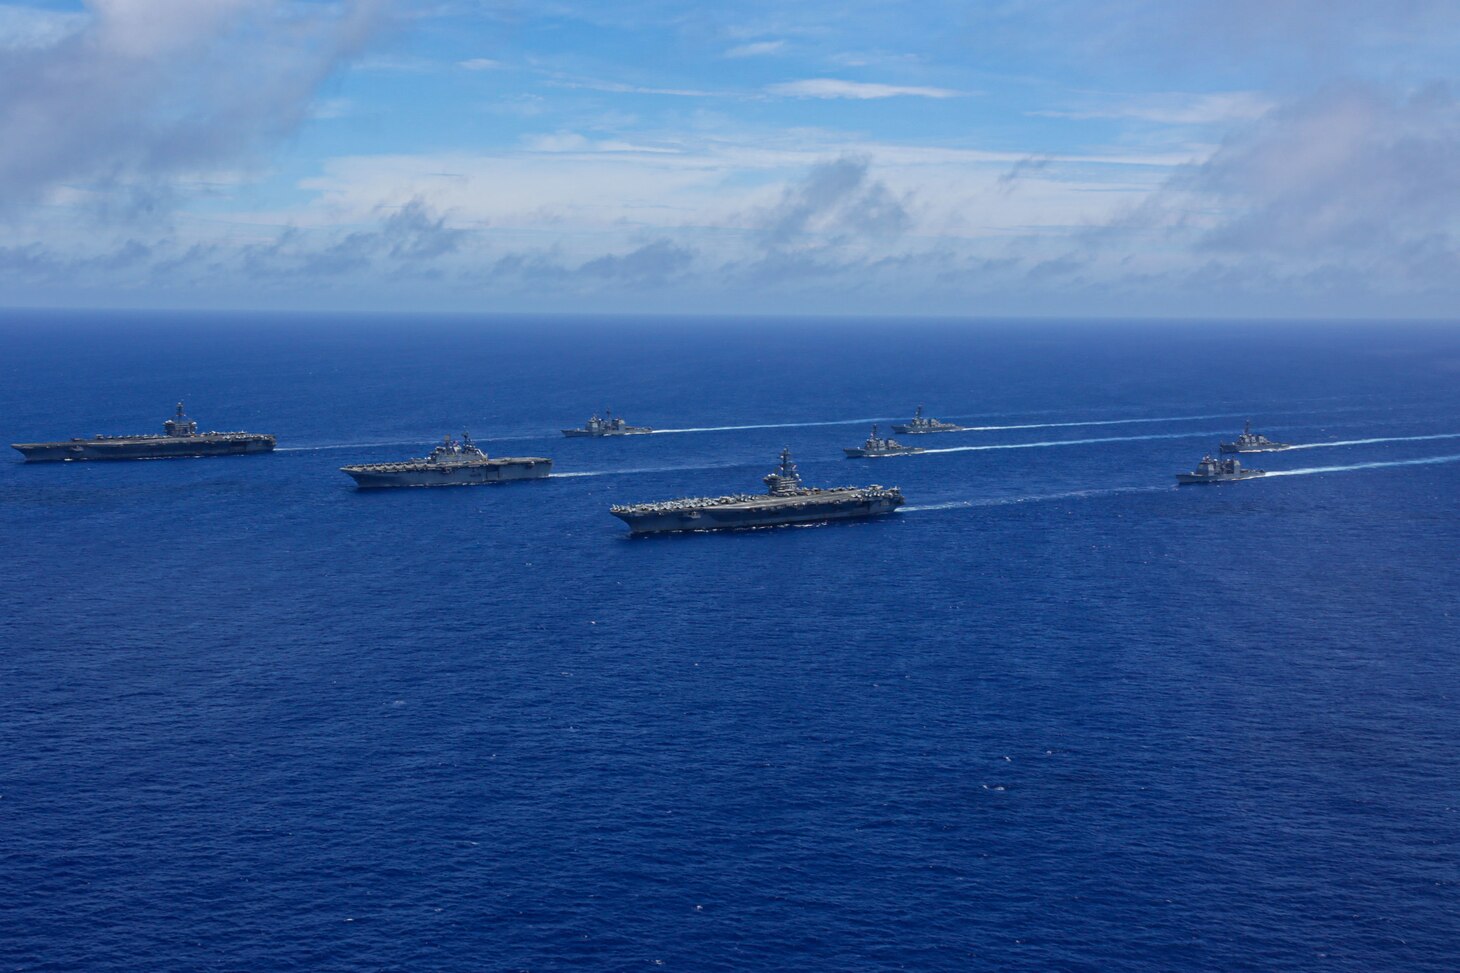 PHILIPPINE SEA (June 12, 2022) The Nimitz-class aircraft carrier USS Abraham Lincoln (CVN 72), front left, America-class amphibious assault ship USS Tripoli (LHA 7), front center, Nimitz-class aircraft carrier USS Ronald Reagan (CVN 76), front right, Ticonderoga-class guided-missile cruiser USS Mobile Bay (CG 53), middle left, Arleigh Burke-class guided-missile destroyer USS Benfold (DDG 65), middle center, Ticonderoga-class guided-missile cruiser USS Antietam (CG 54), middle right, Arleigh Burke-class guided-missile destroyer USS Spruance (DDG 111), back left, and Arleigh Burke-class guided-missile destroyer USS Fitzgerald (DDG 62) sail in formation during Valiant Shield 2022 (VS22). VS22 is a U.S.-only, biennial field training exercise (FTX) focused on integration of joint training in a multi-domain environment. This training builds real-world proficiency in sustaining joint forces through detecting, locating, tracking, and engaging units at sea, in the air, on land, and in cyberspace in response to a range of mission areas. (U.S. Navy photo by Mass Communication Specialist Seaman Aleksandr Freutel)